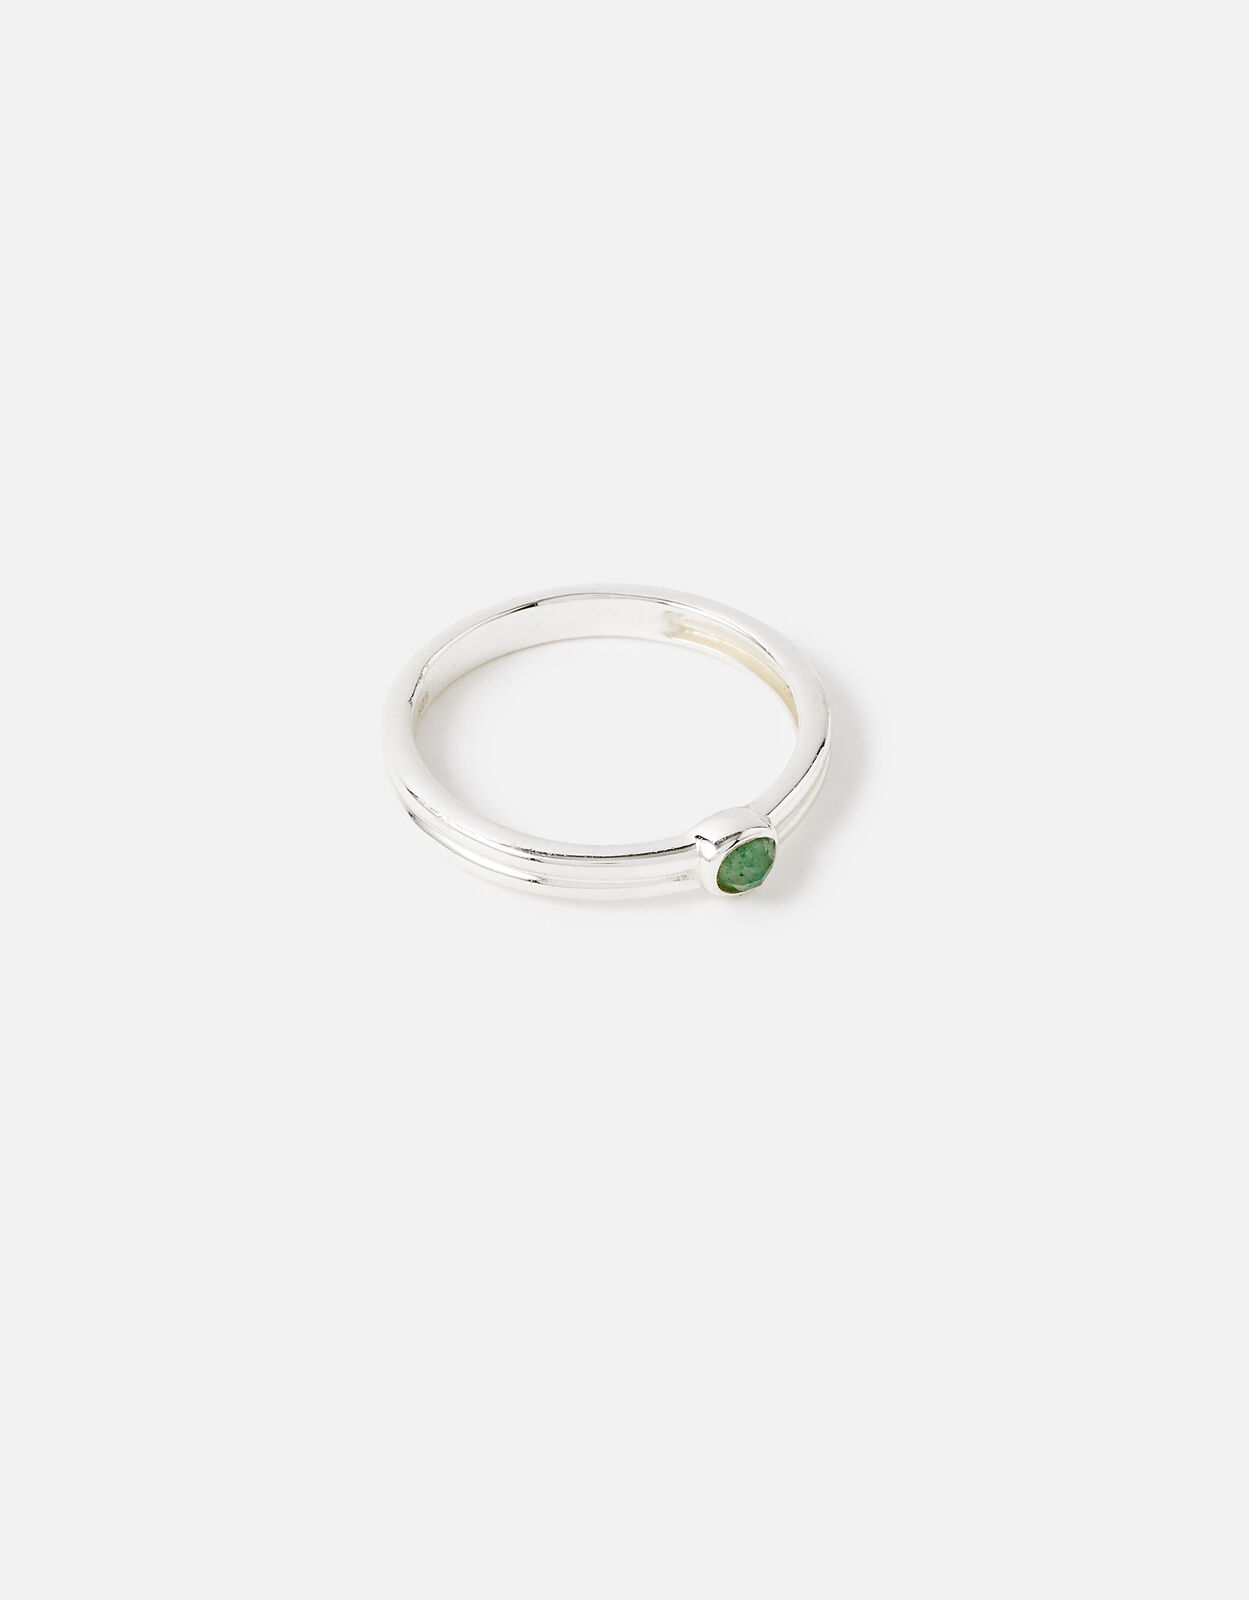 Details more than 205 aventurine rings sterling silver best